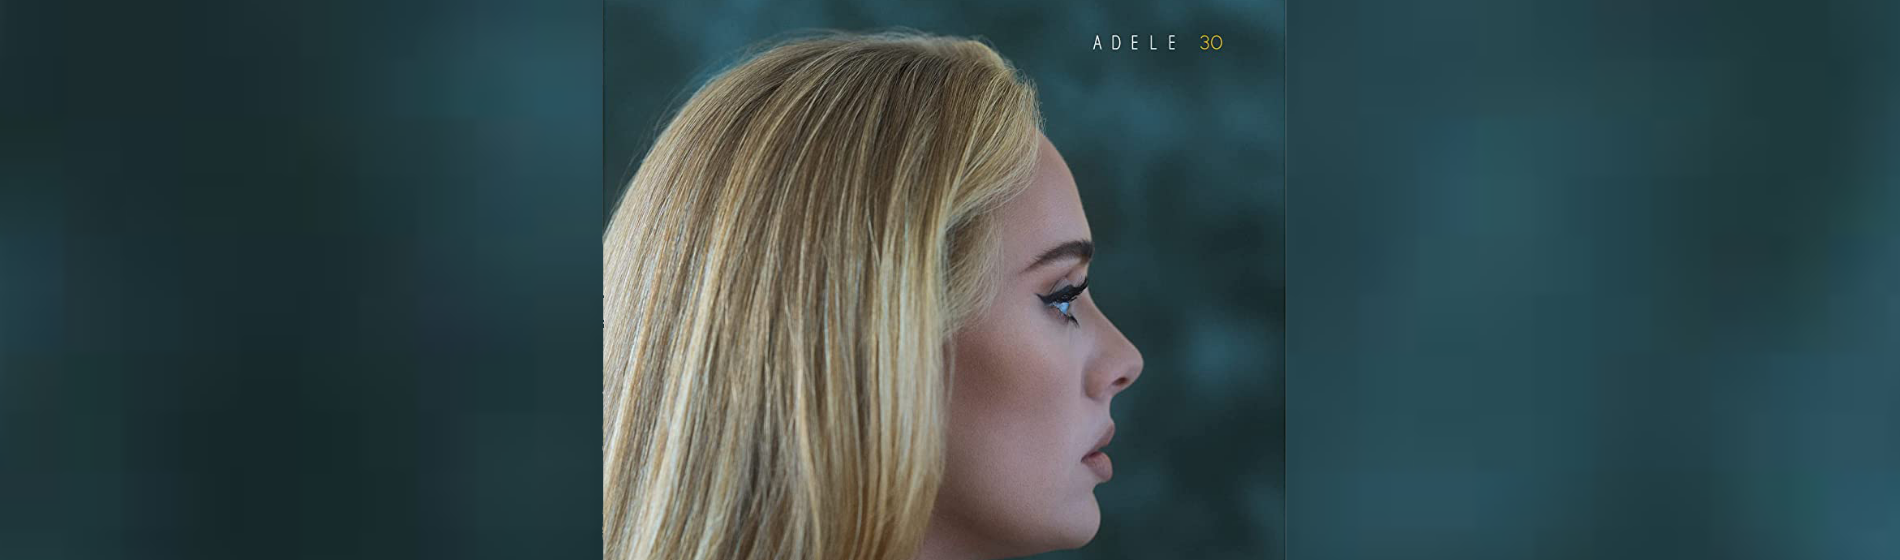 Adele 30 cover